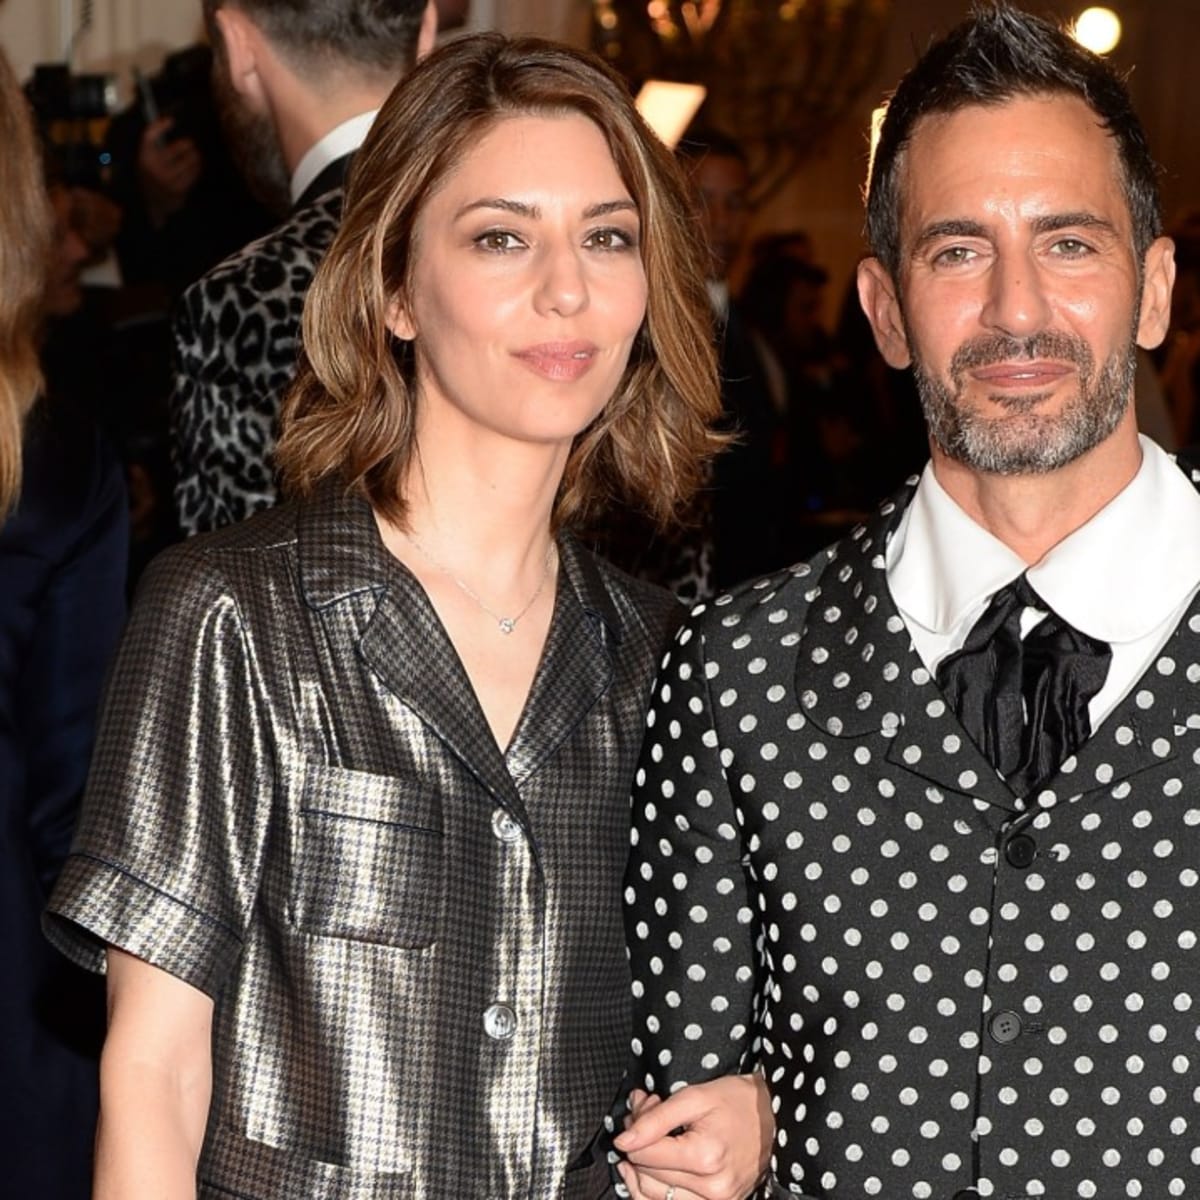 Great Outfits in Fashion History: Sofia Coppola in Marc Jacobs PJs